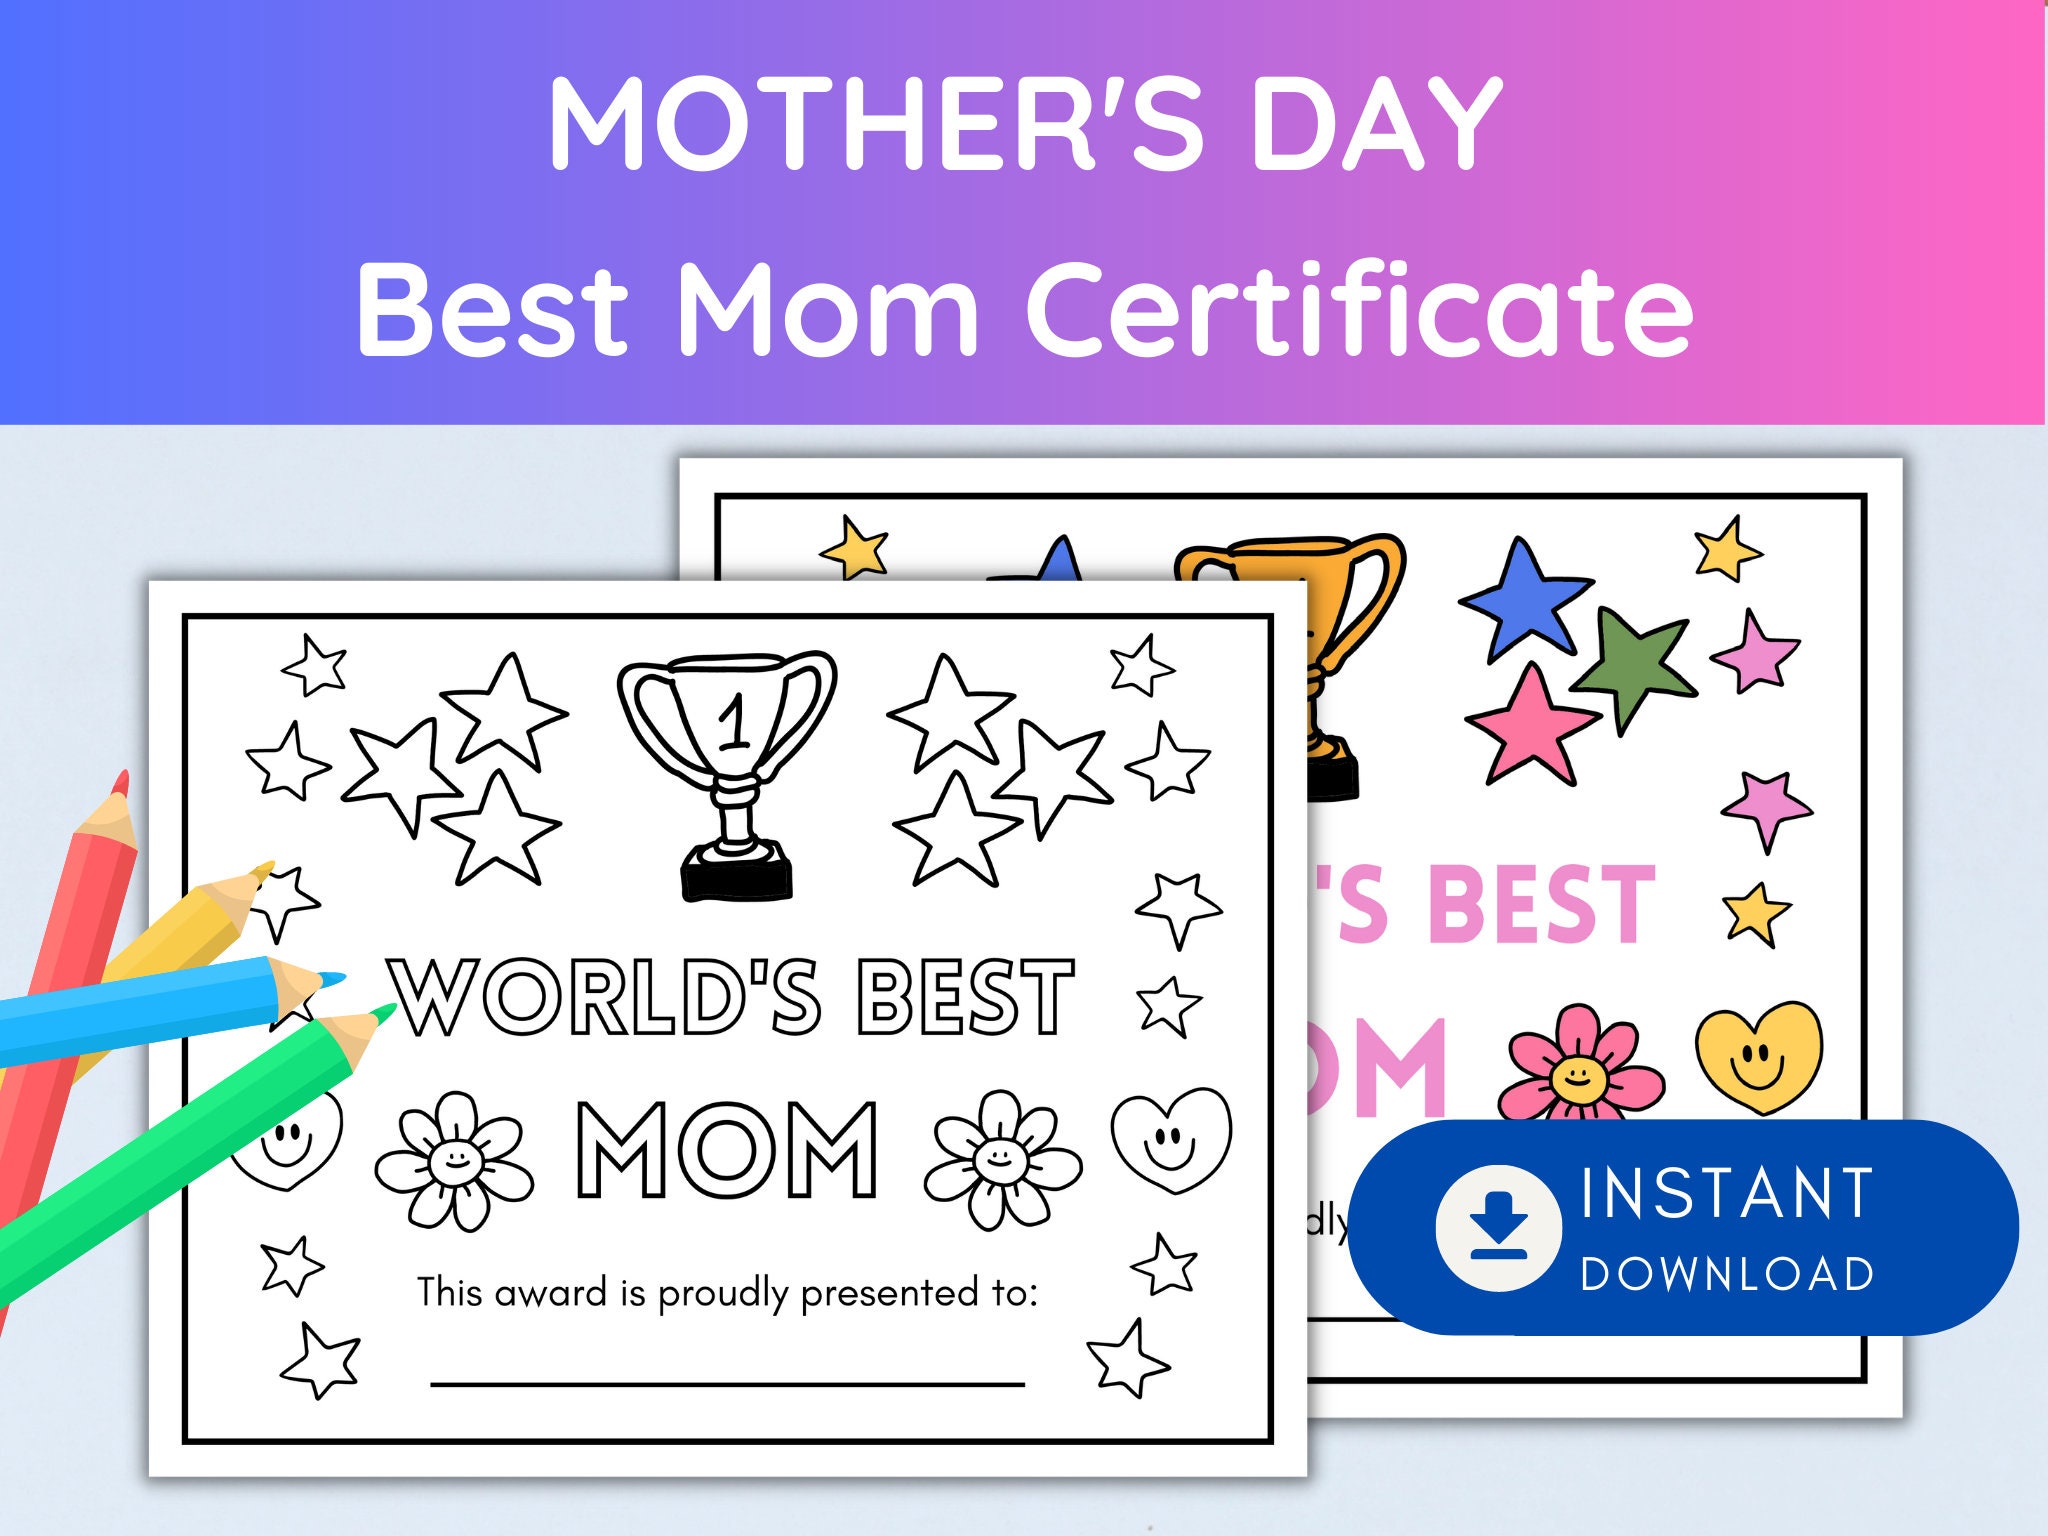 Worlds best mom mothers day certificate coloring activity sheet for kids to give to mothers instant download printable worksheet